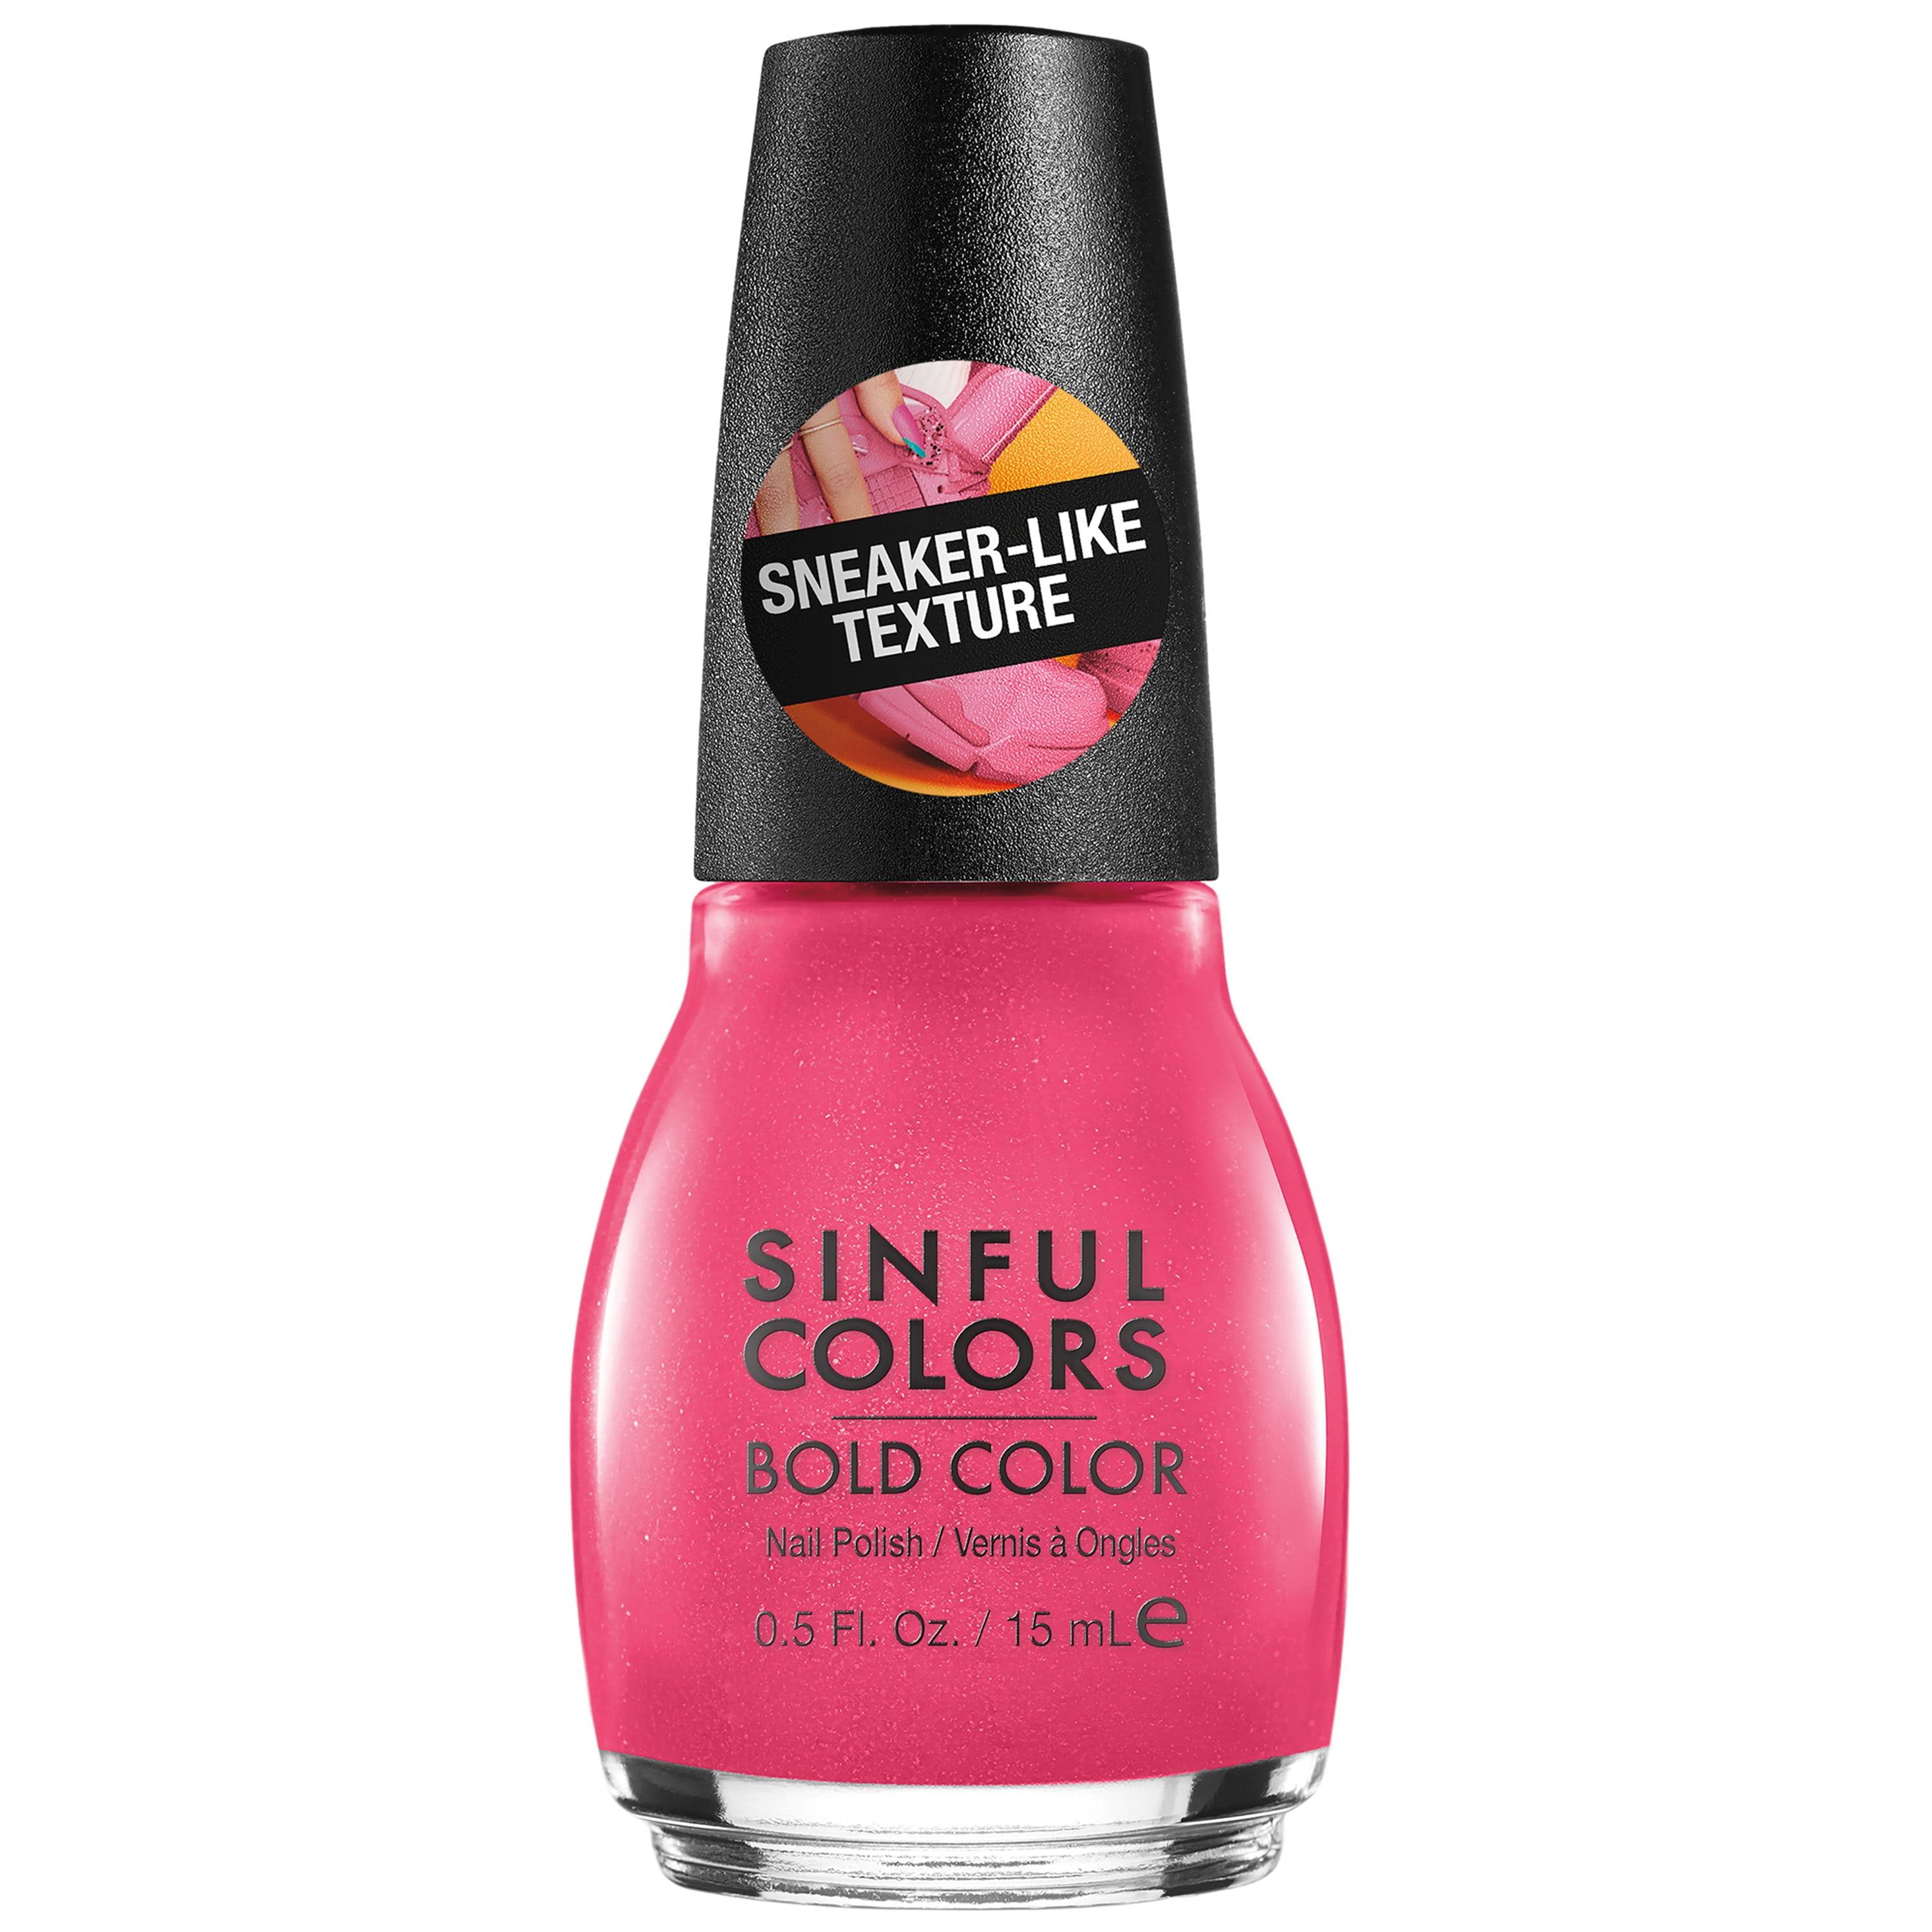 Sinful Colors Sporty Brights Nail Polish, Fit Chick